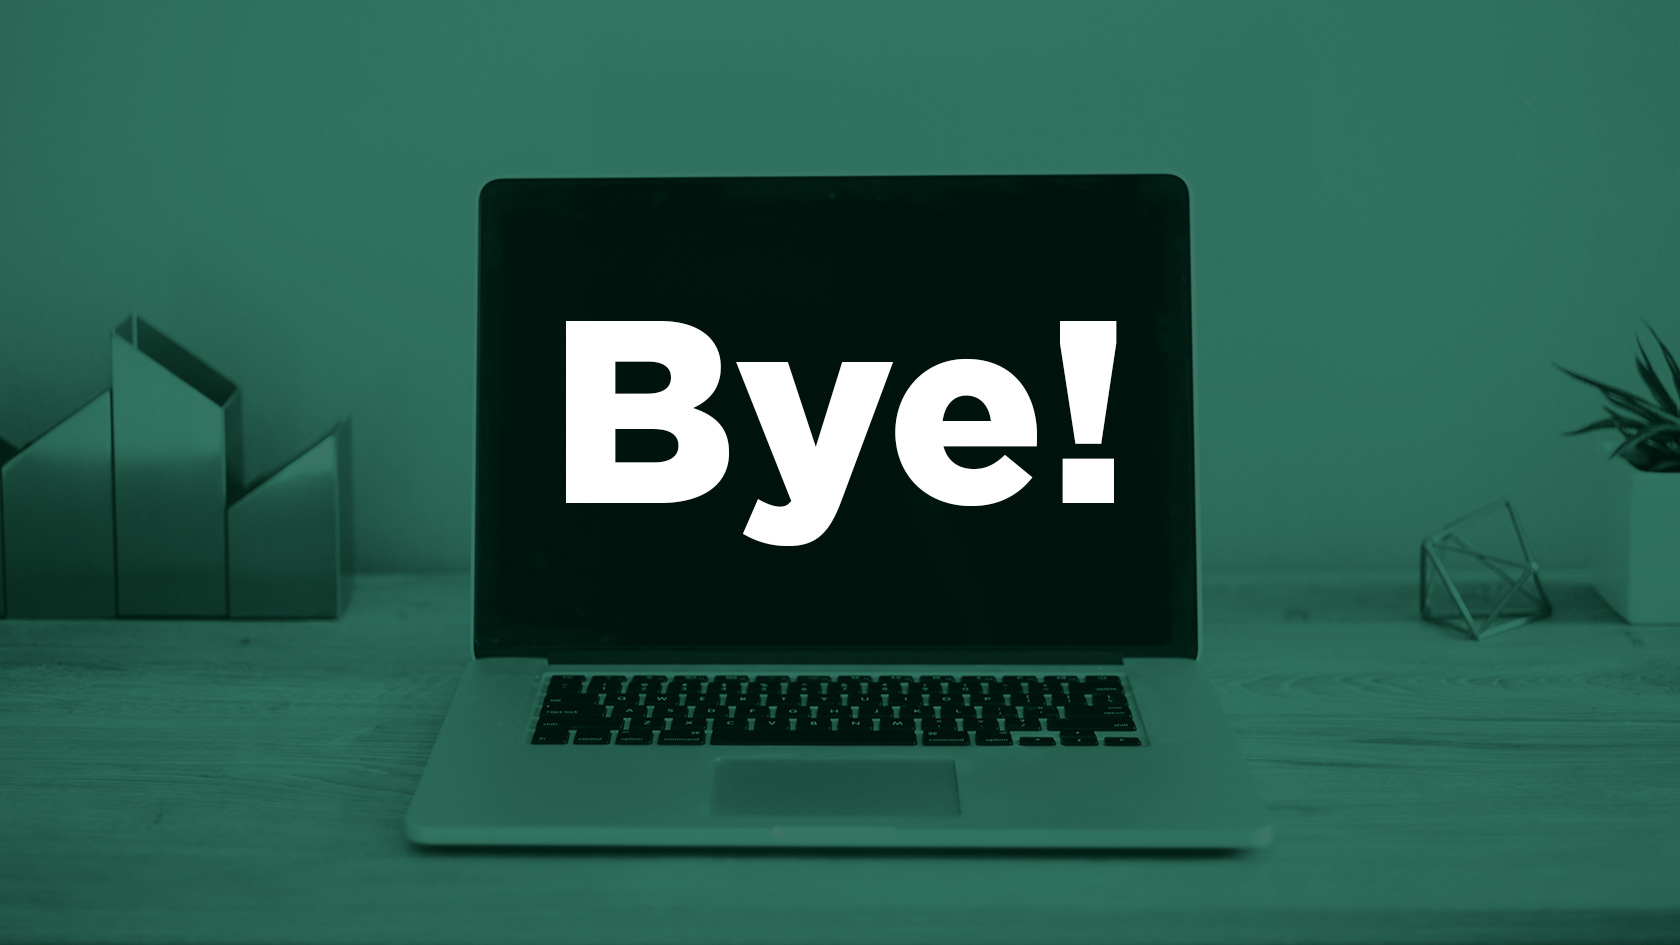 A laptop with the word "Bye!" superimposed over the screen.